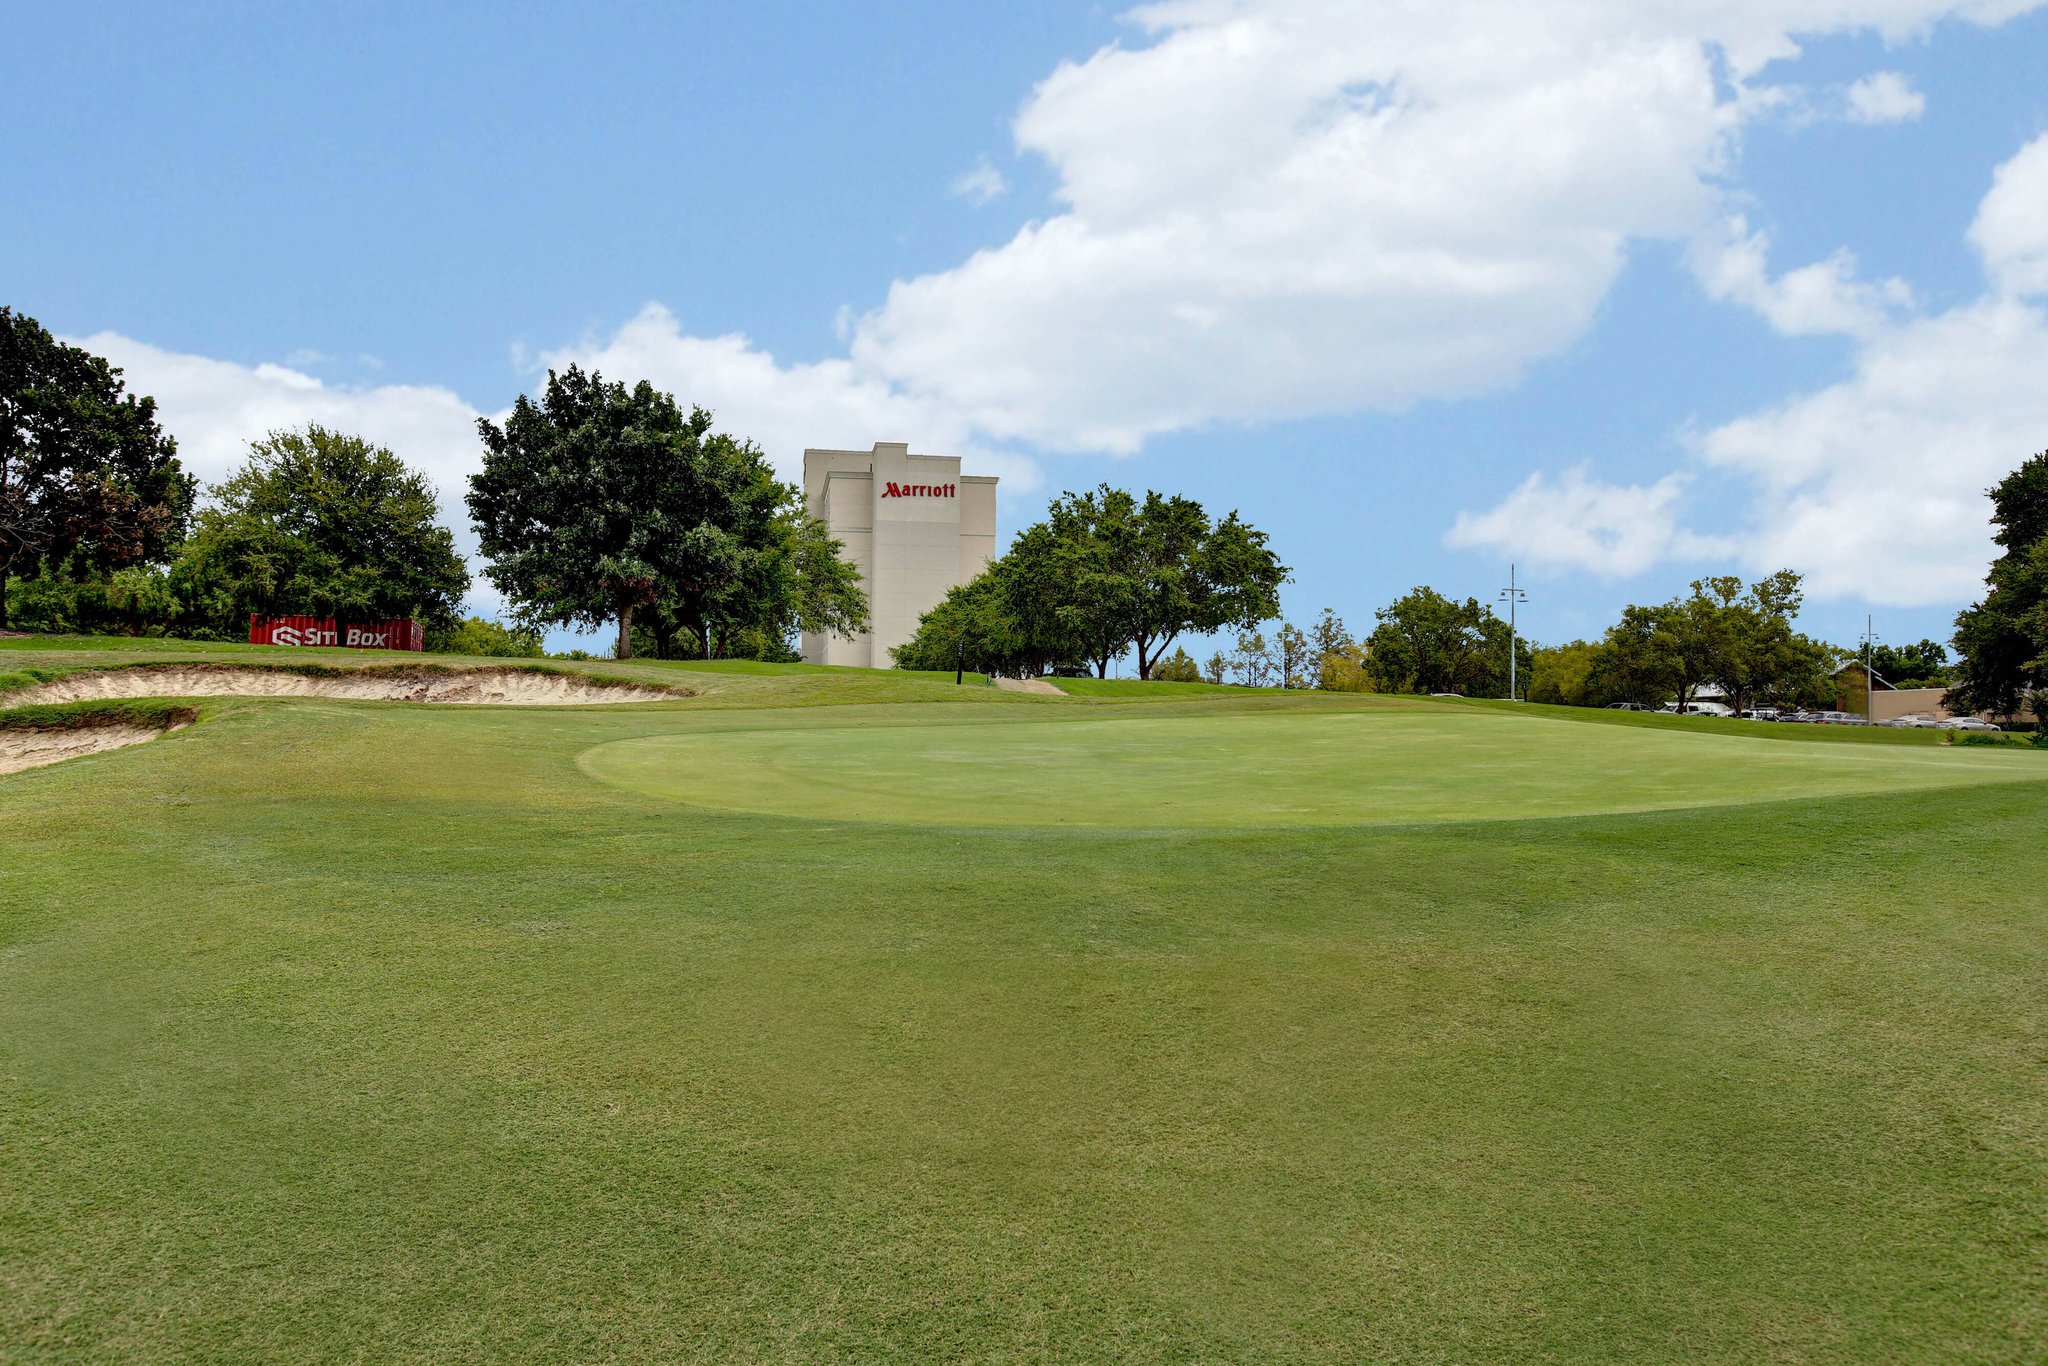 Dallas Fort Worth Marriott Hotel and Golf Club at Champions Circle